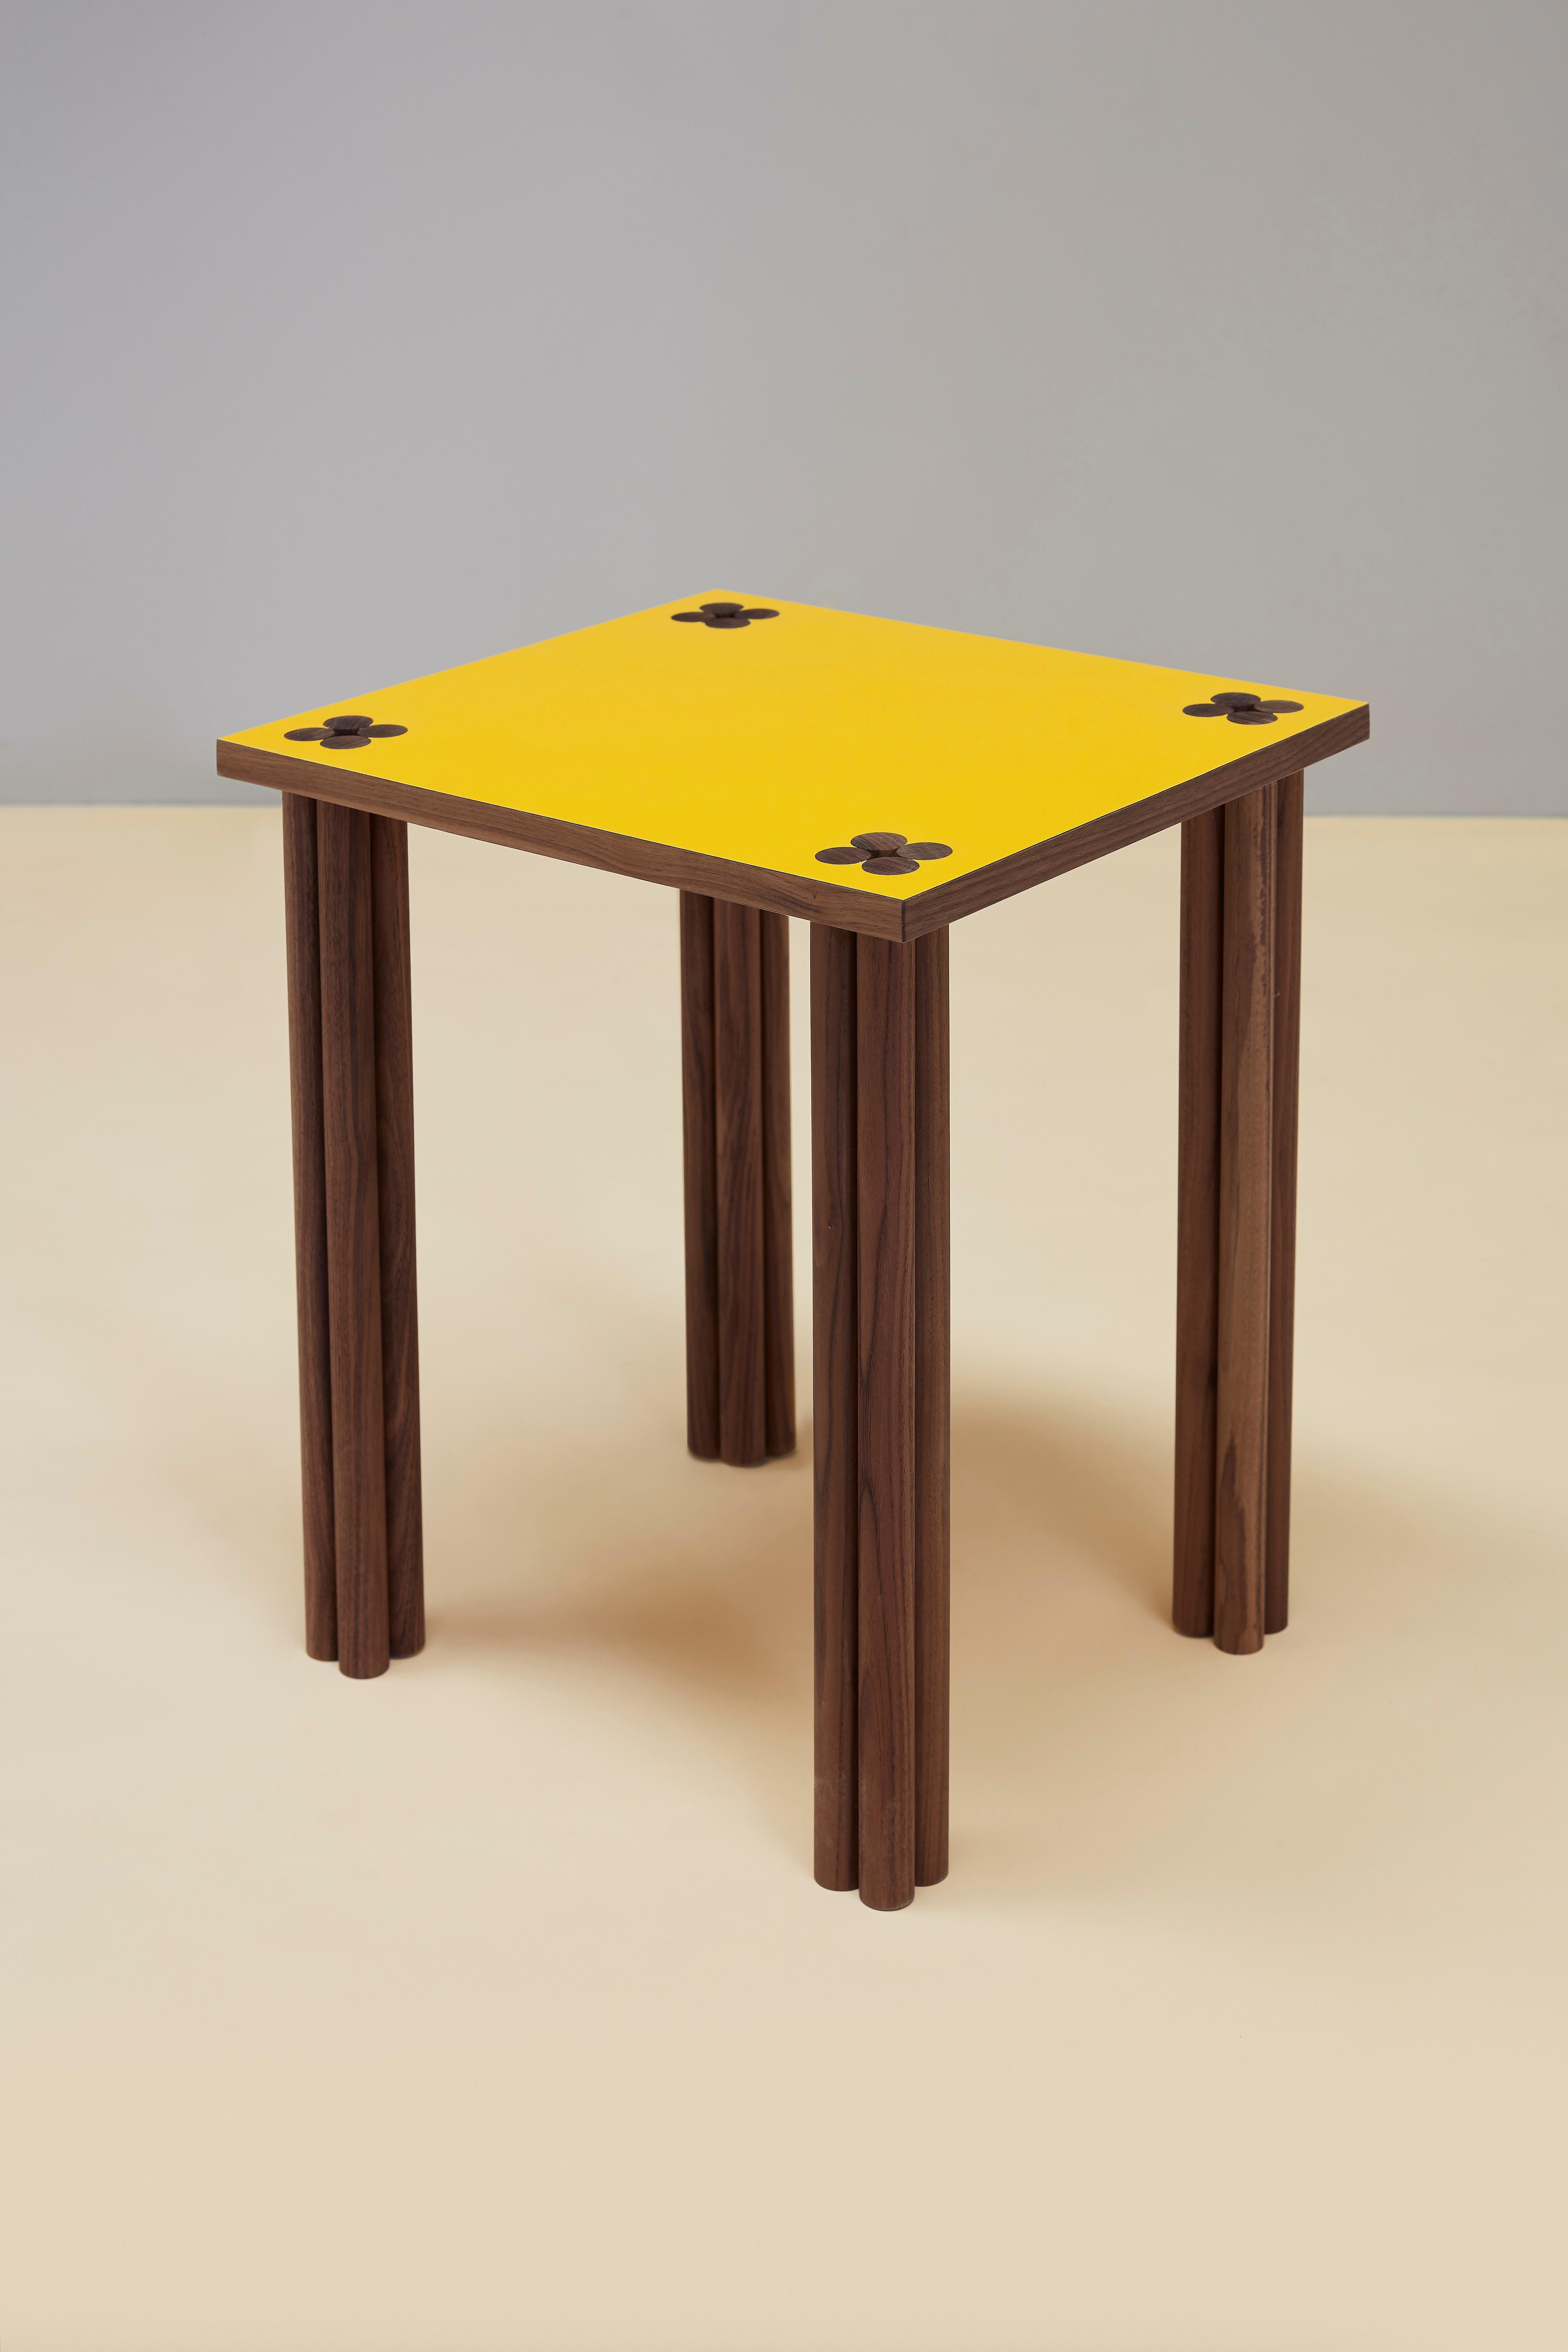 Hana side table by Tino Seubert.
Dimensions: D 43, W 38 x H 50 cm. 
Materials: Solid walnut wood, walnut veneer, Formica.
Oak or other wood possible. 

Tino Seubert
When he first made his now signature wicker and aluminium stools and benches in 2018